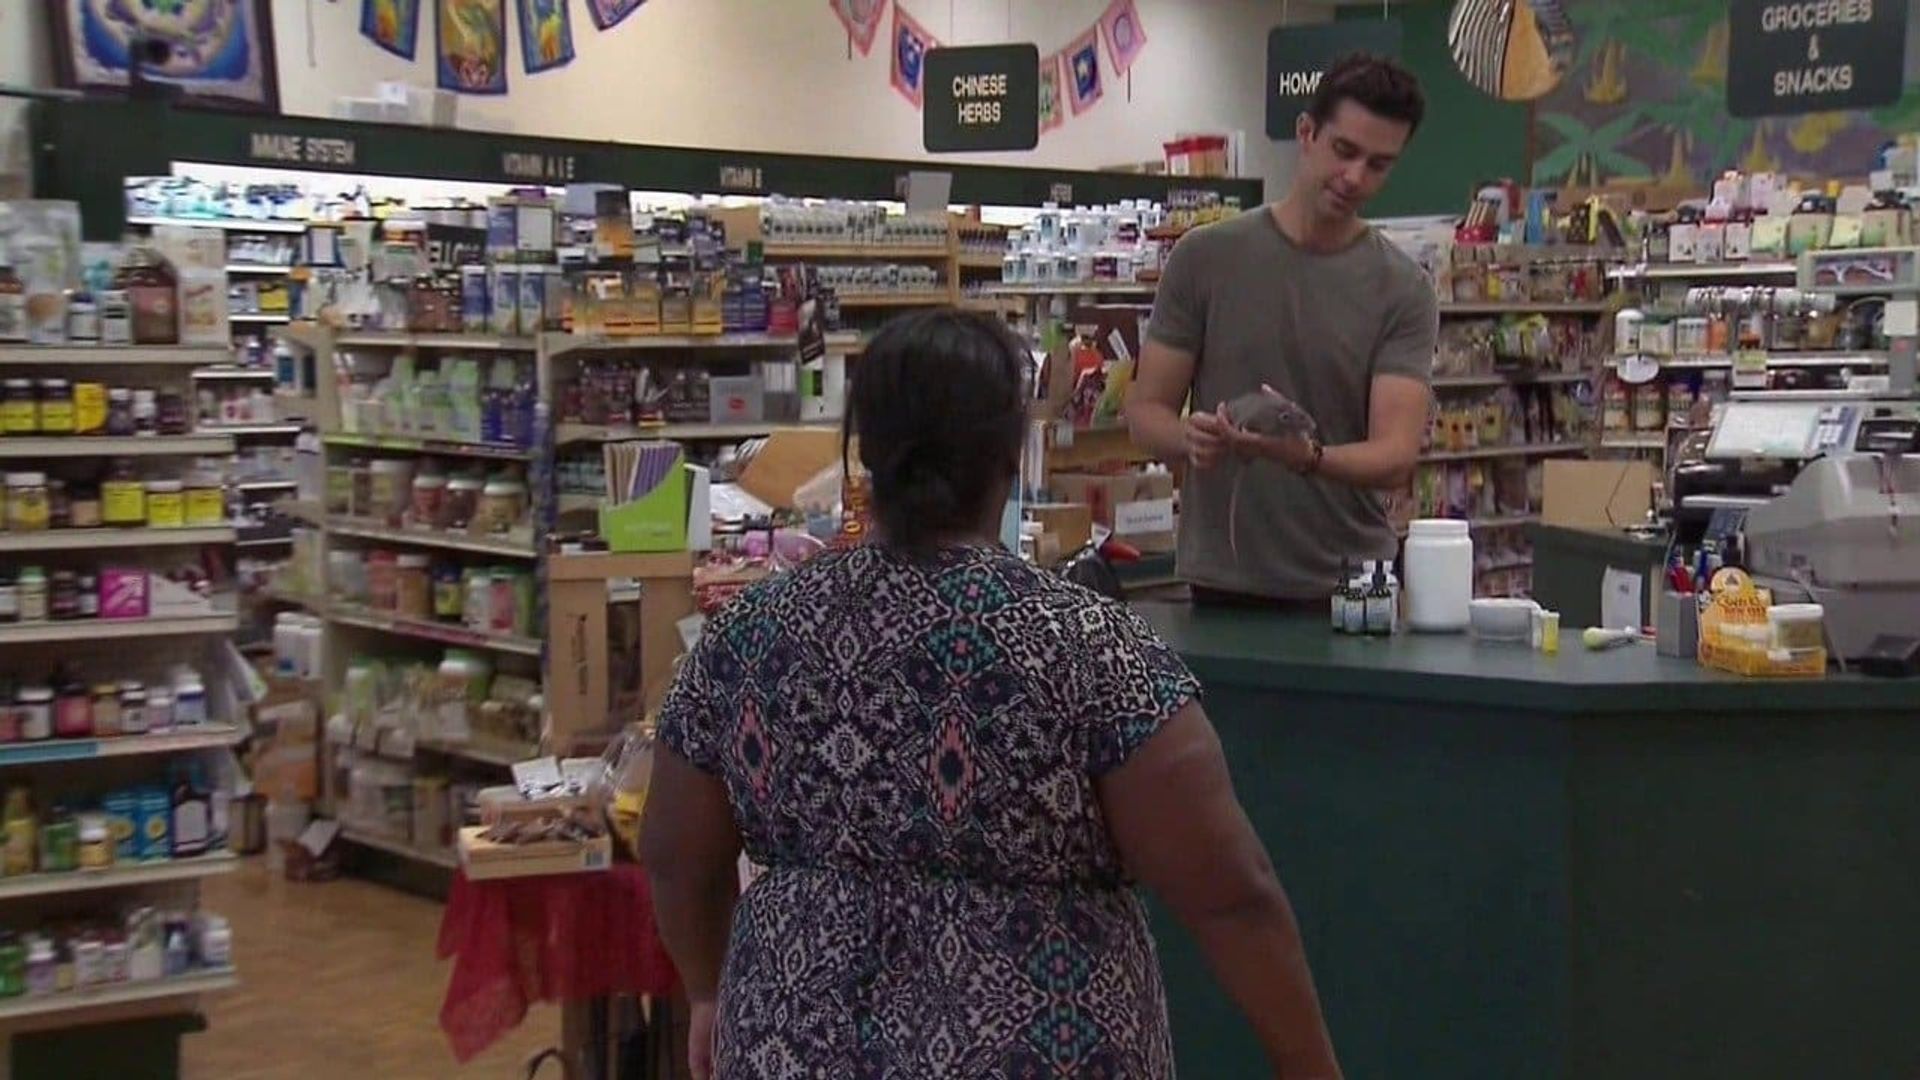 The Carbonaro Effect background